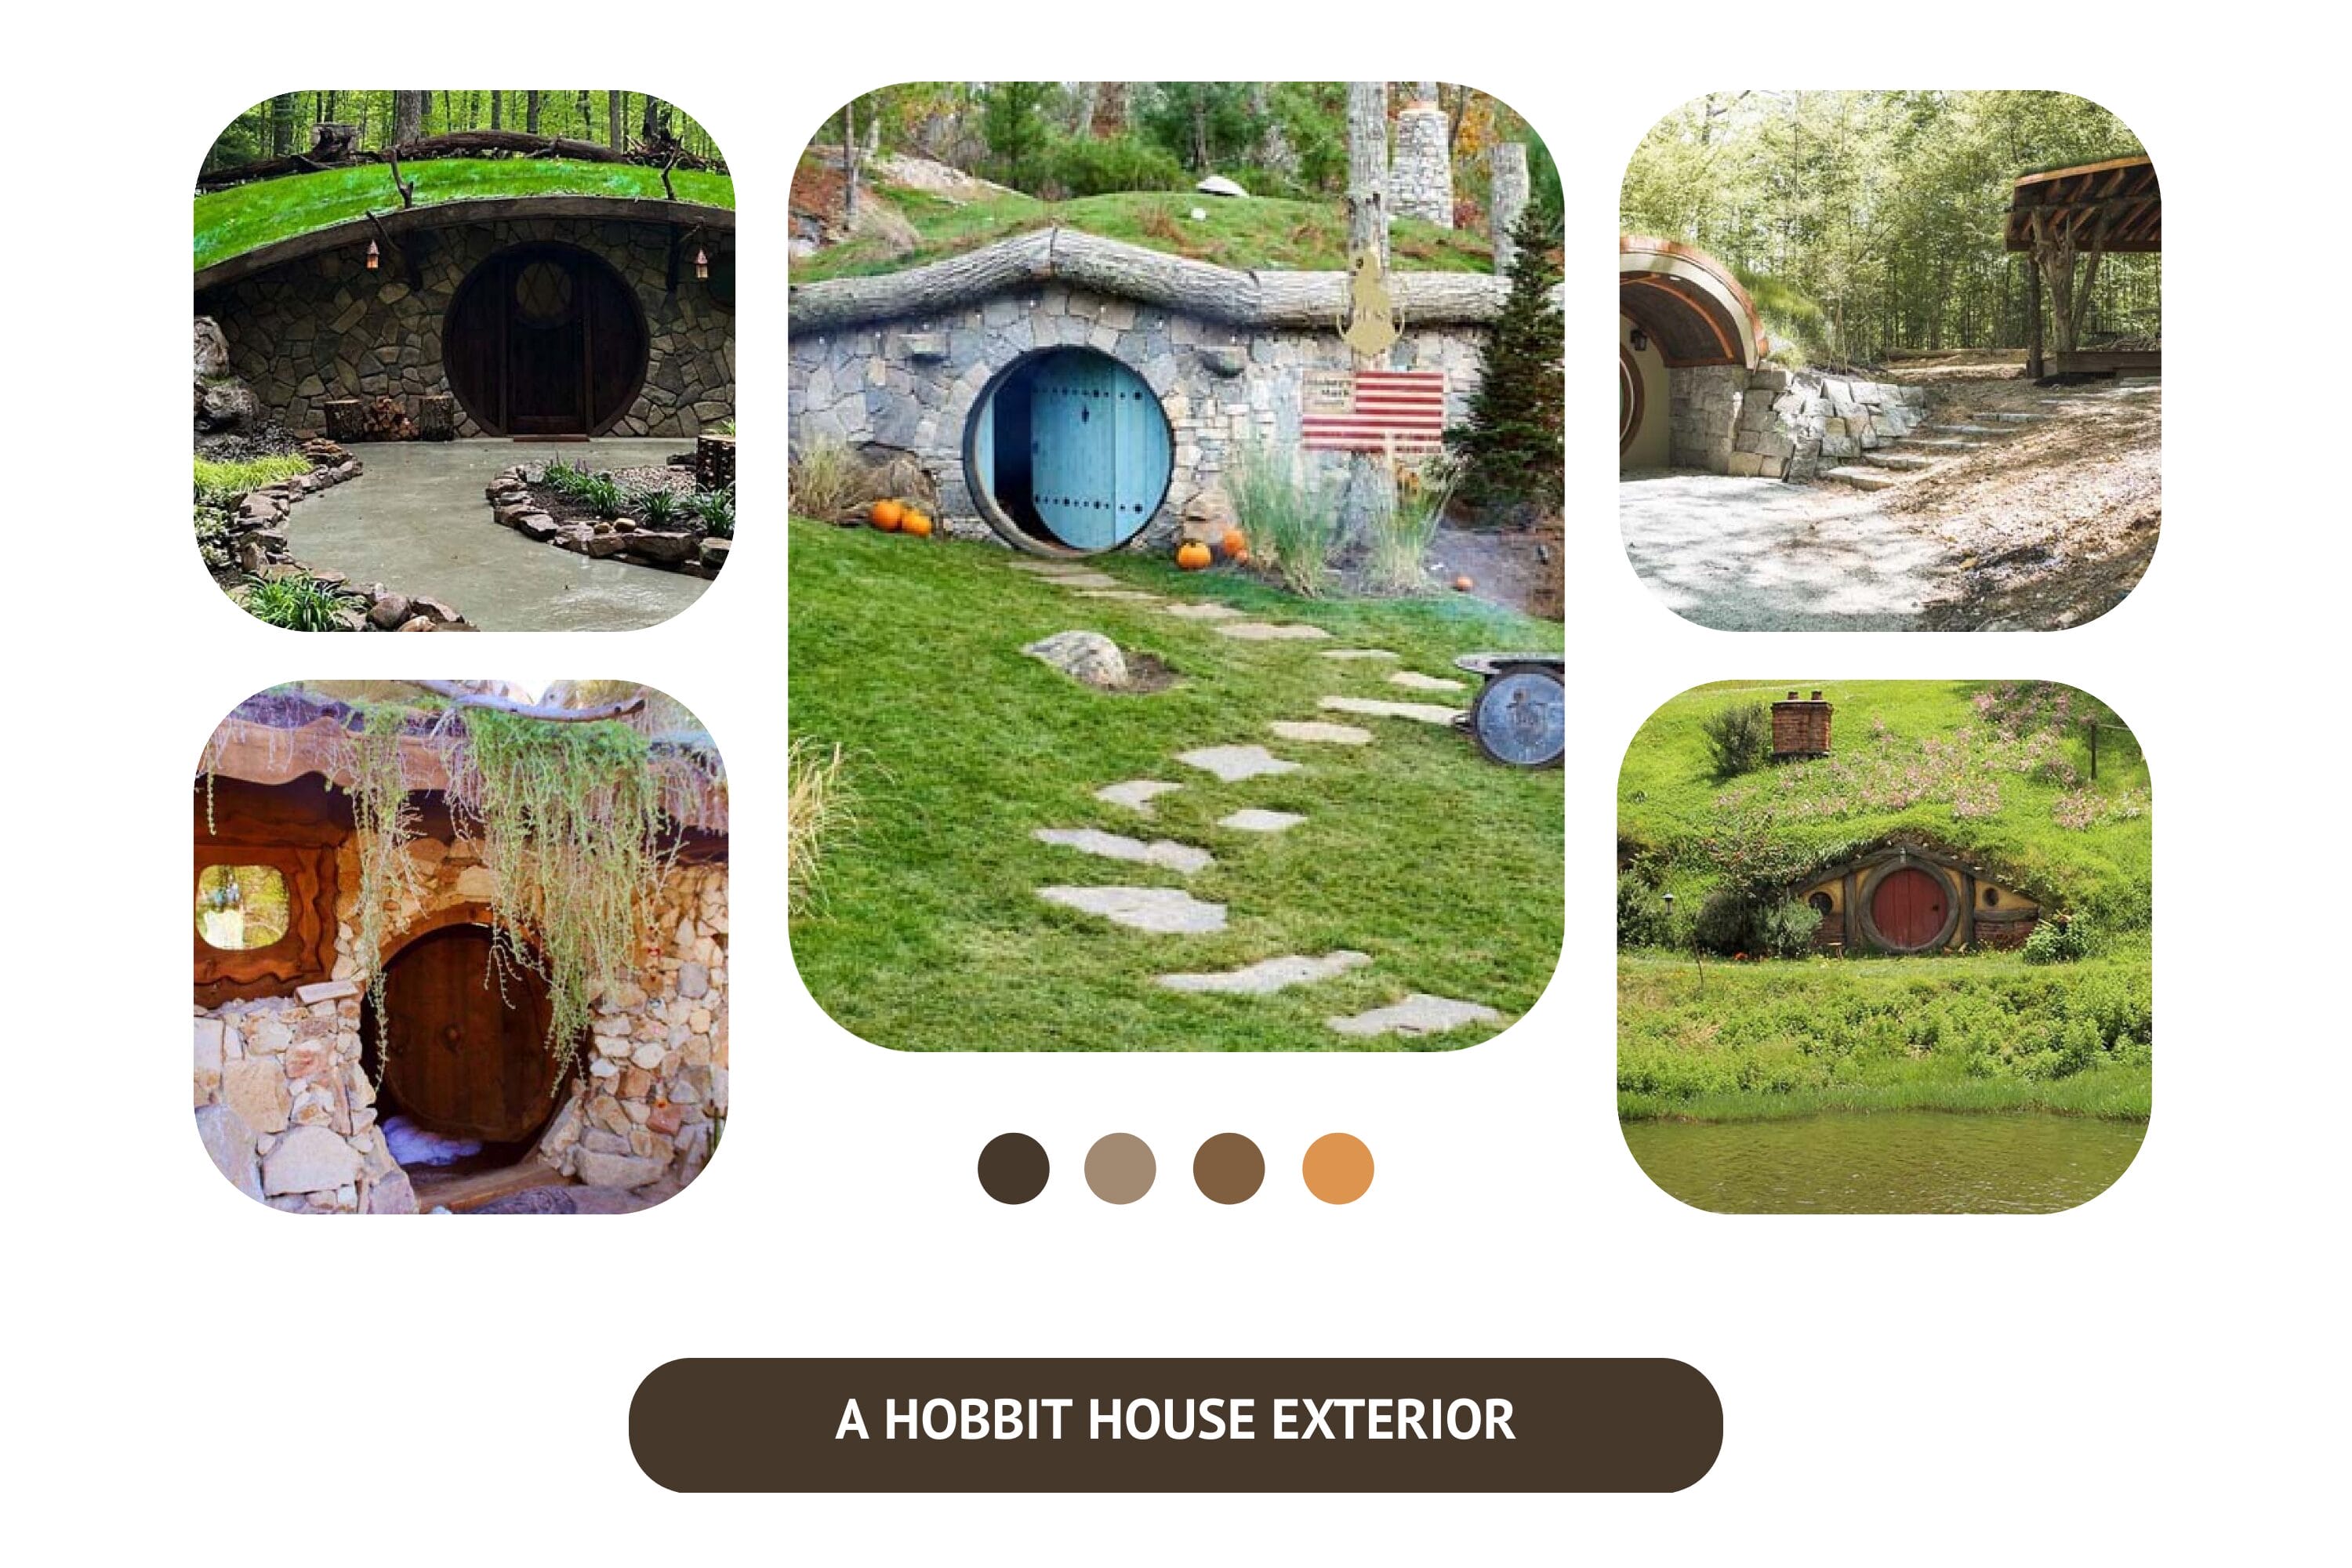 Designing a hobbit house exterior creates a charming, unique home reflecting J.R.R. Tolkien's magical world.